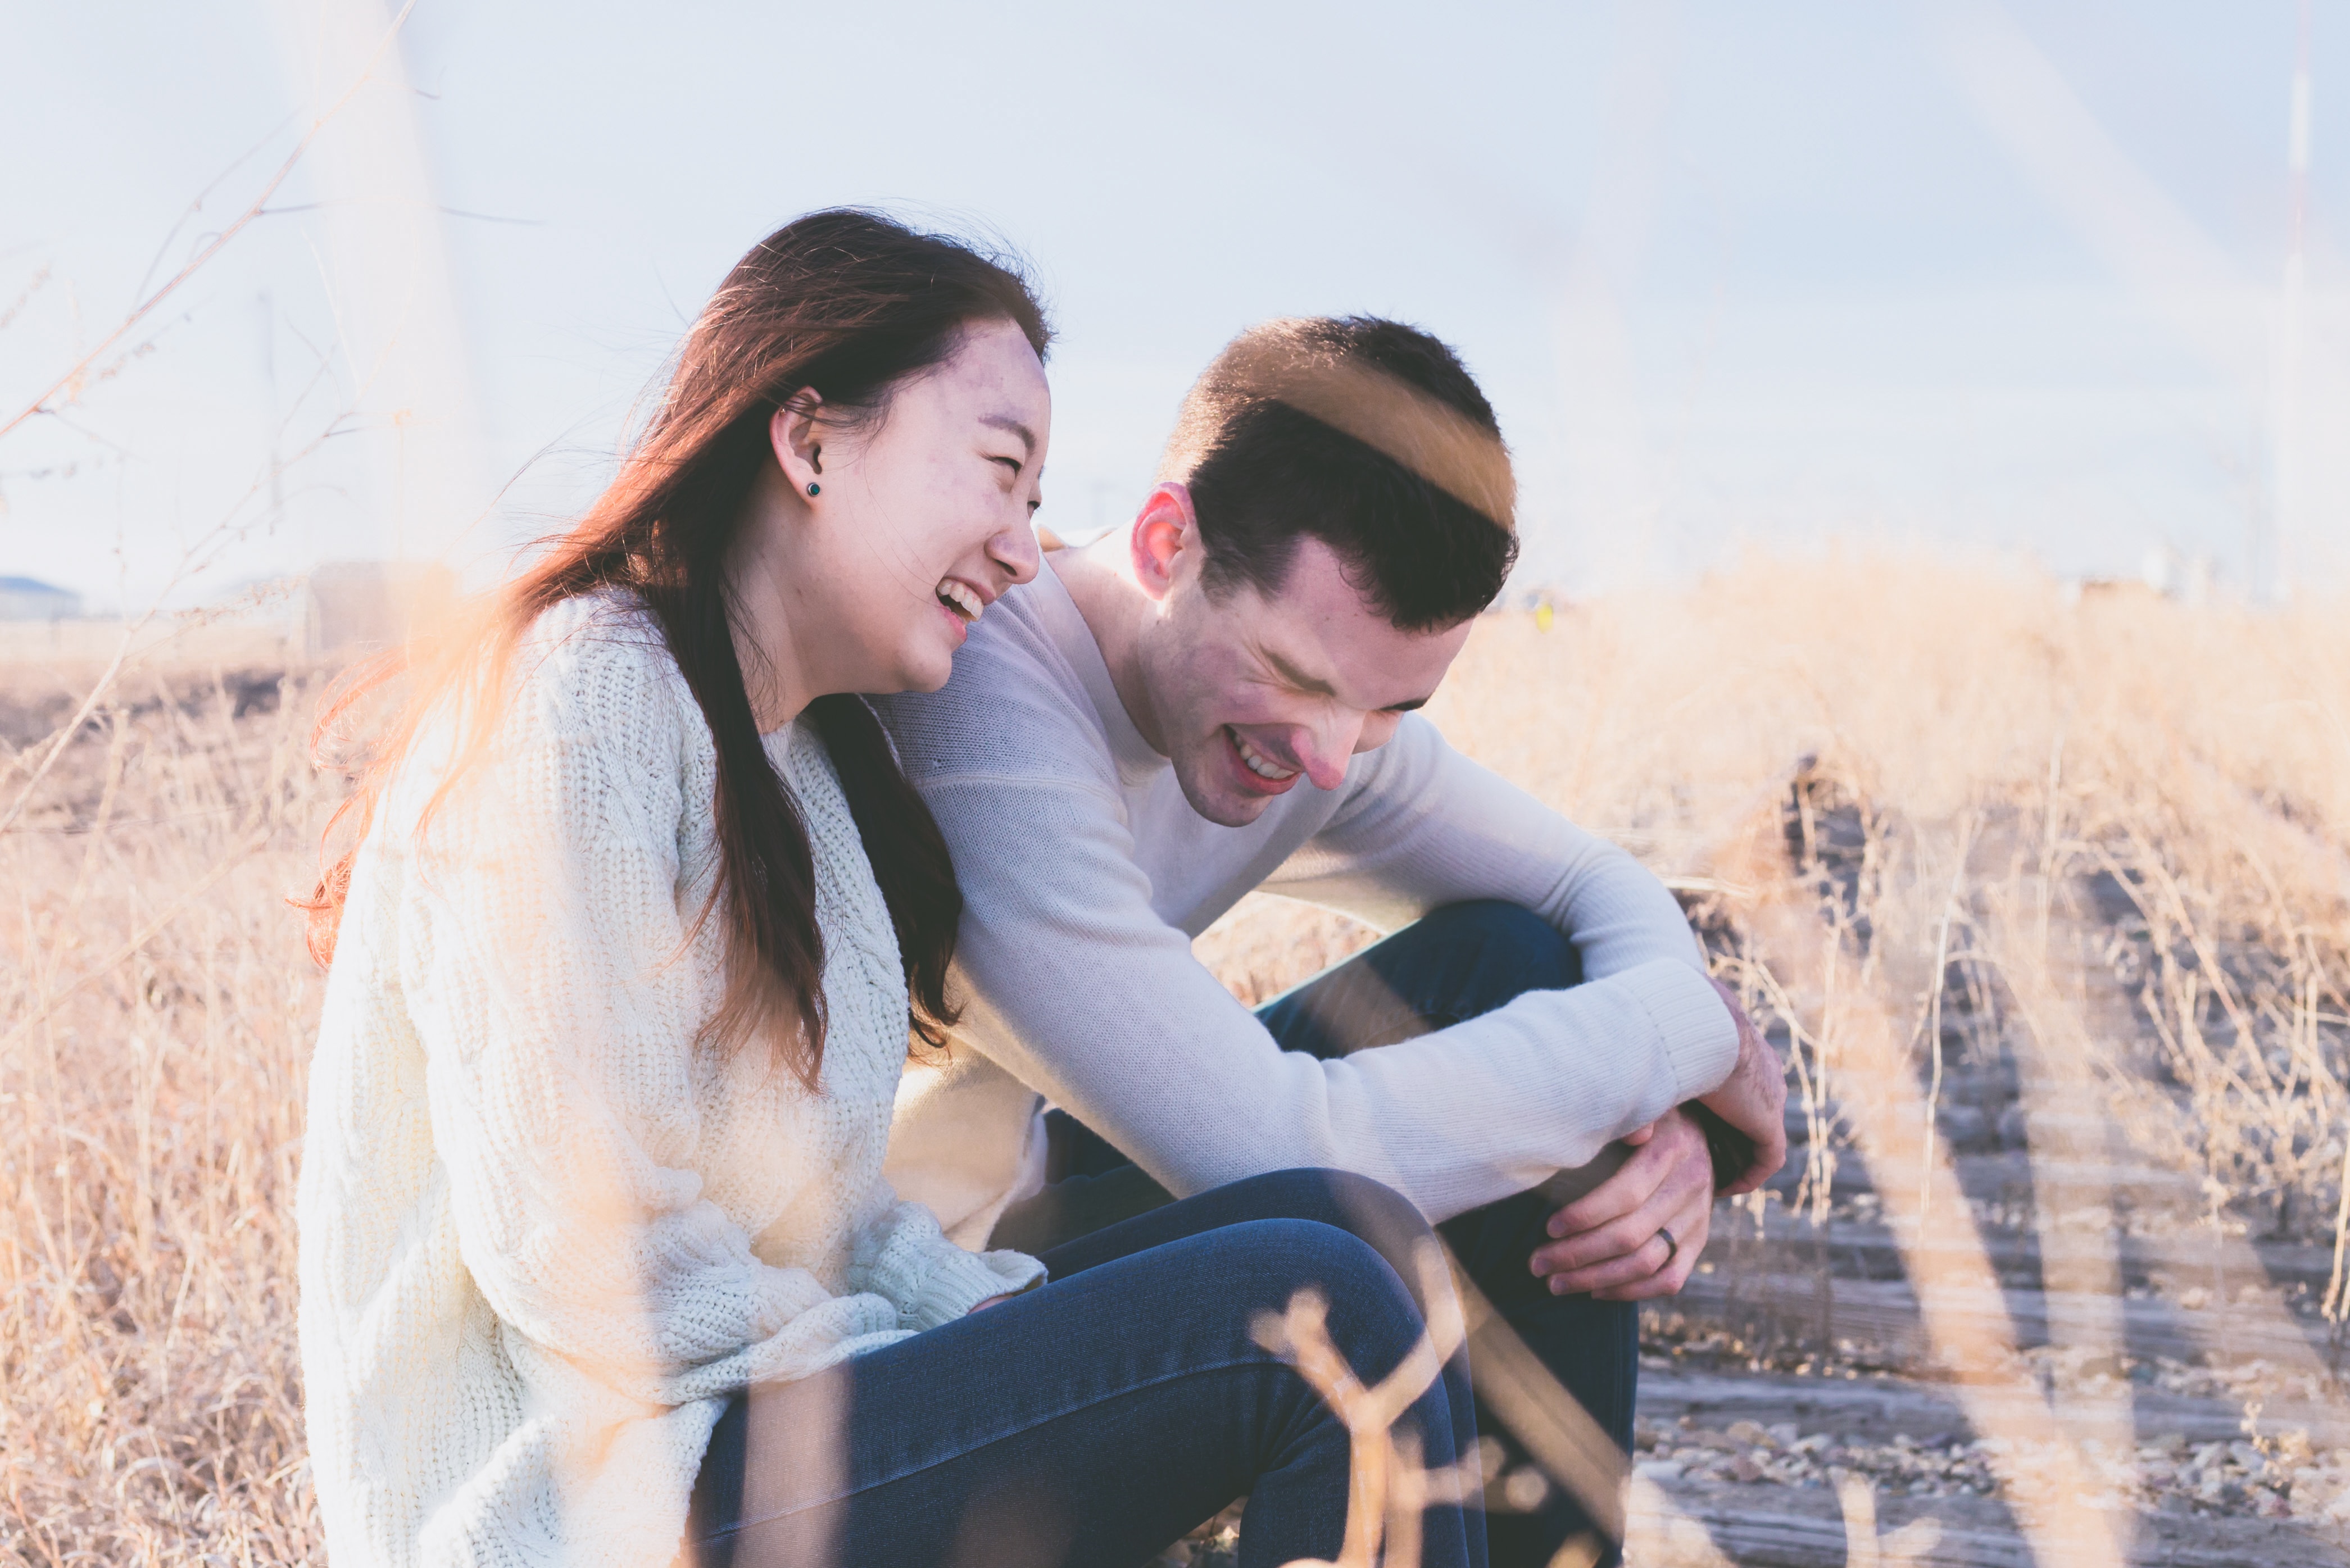 Couple sharing a hearty laugh | Source: Unsplash